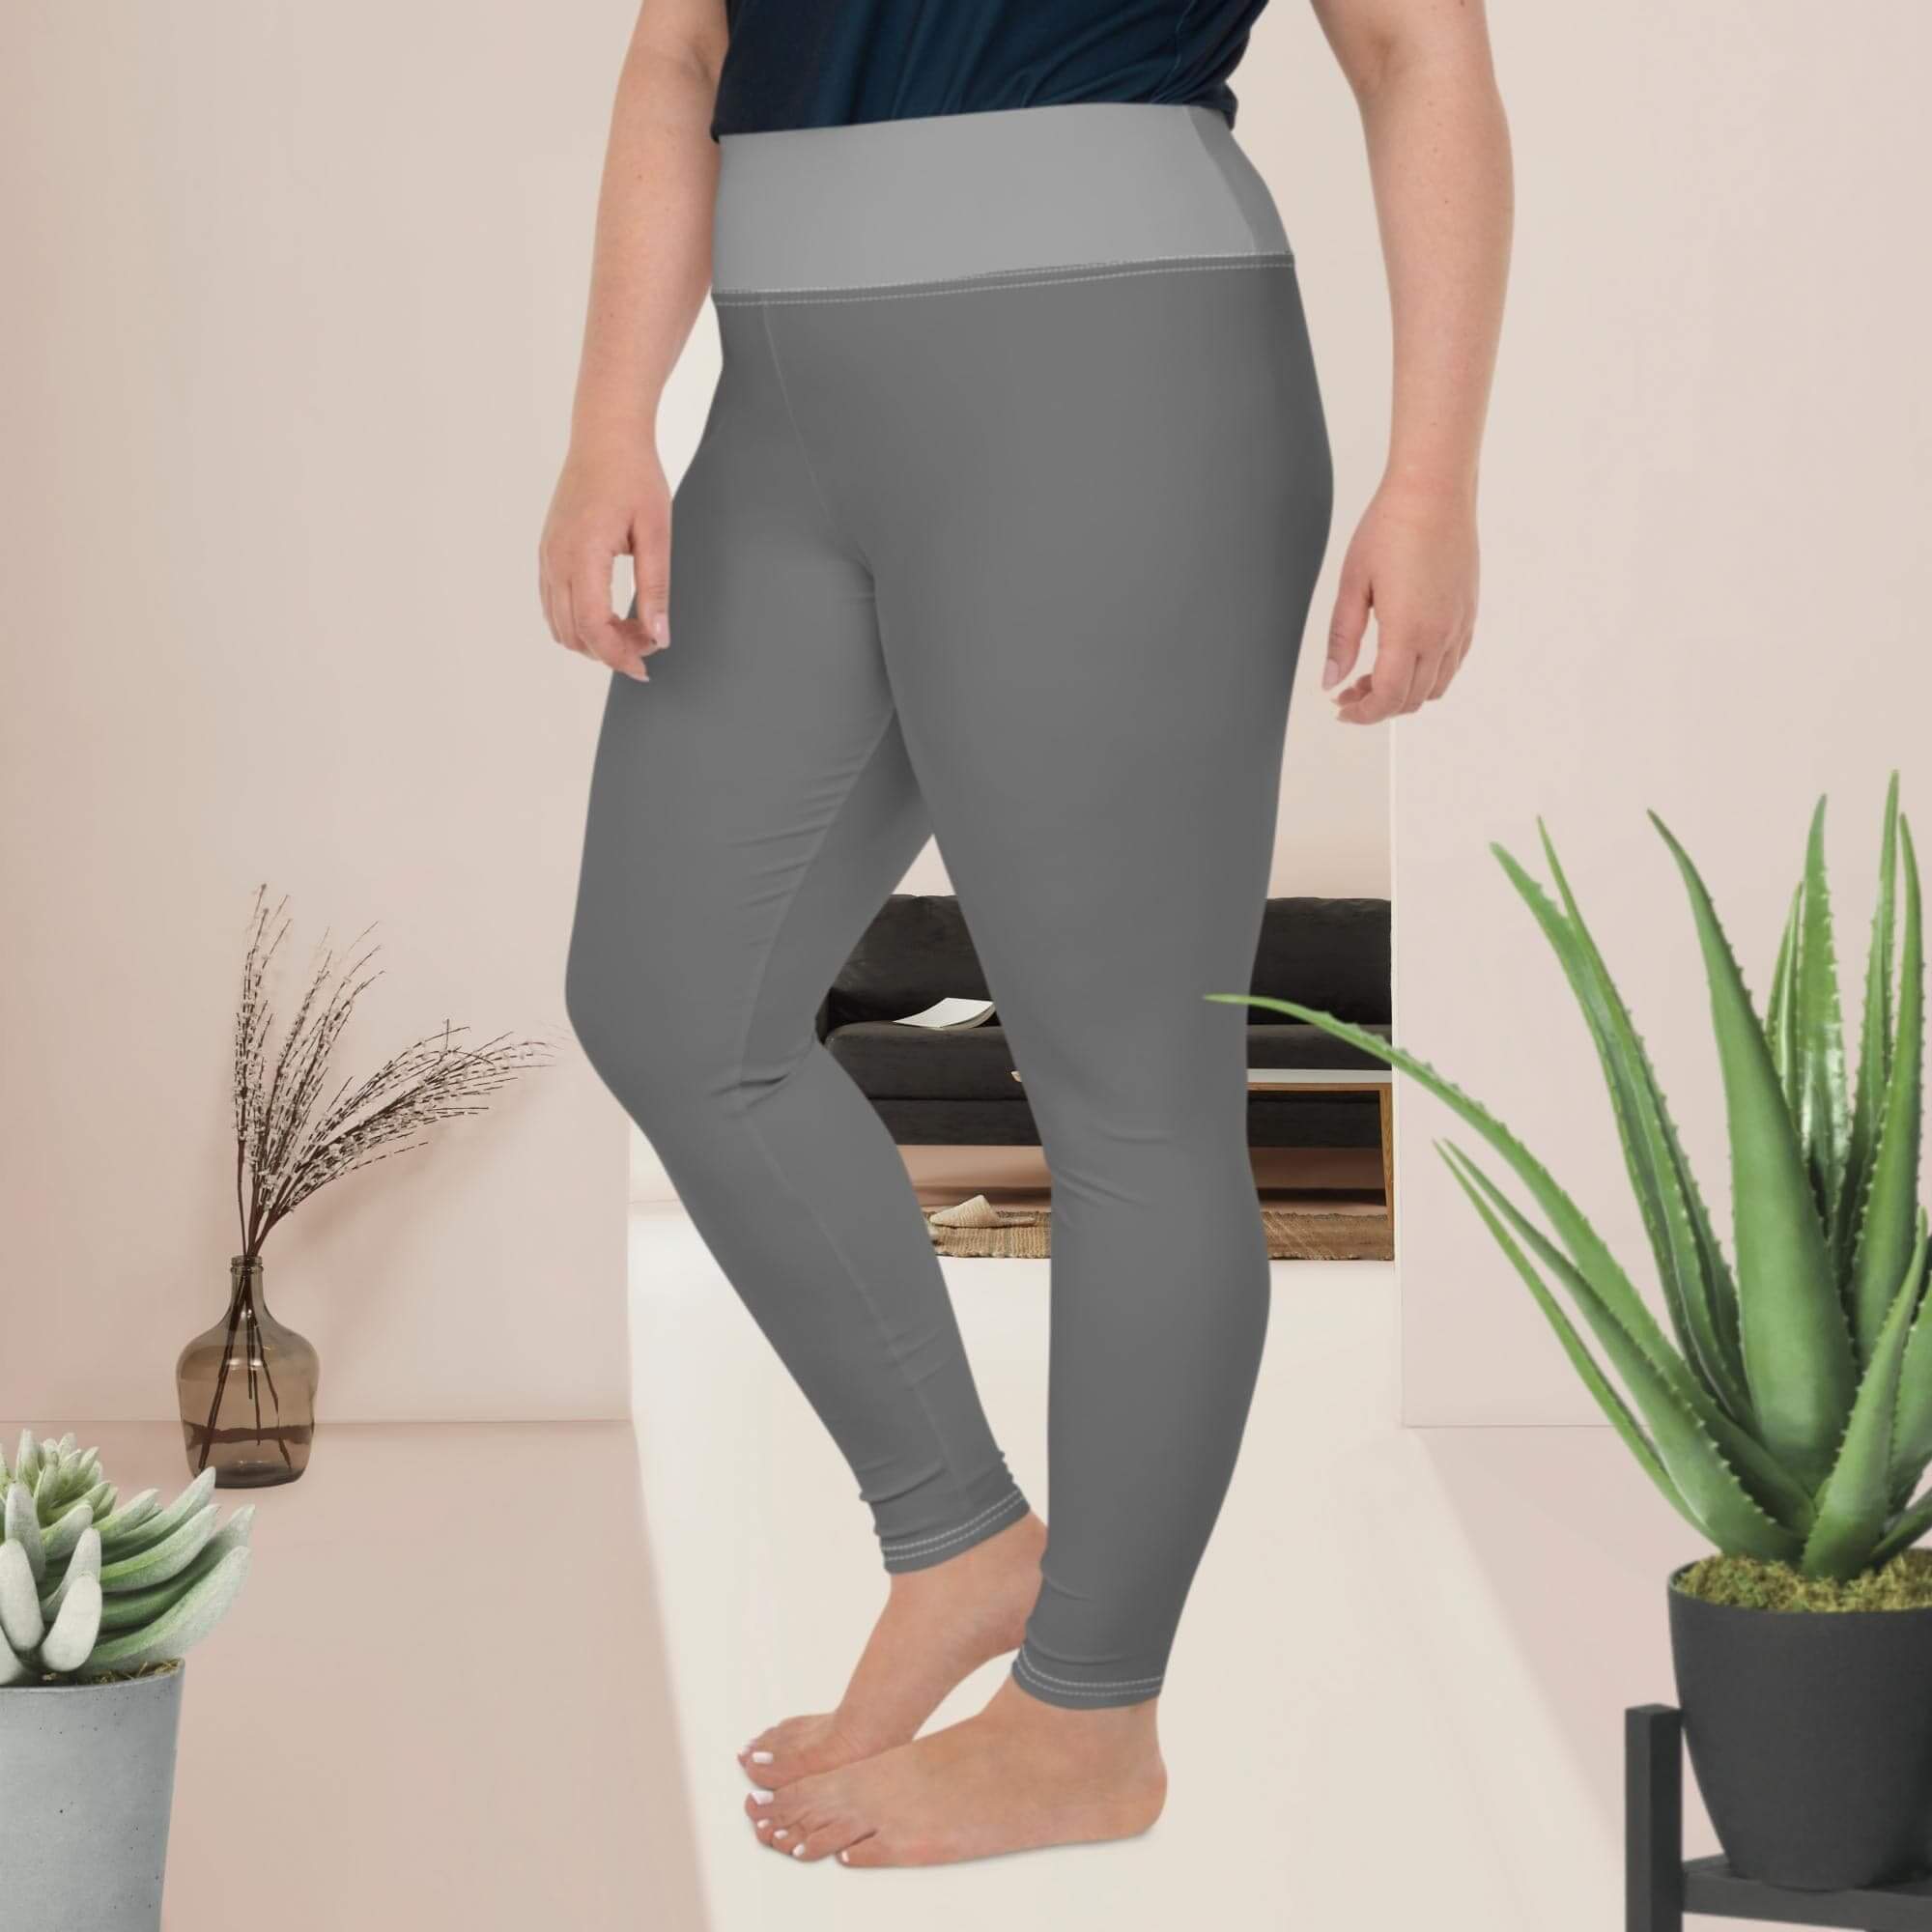 Women's Plus Size Leggings | Casual High Waisted Leggings - Revive Wear     Women's Plus Size Leggings. The best workout leggings for women. Get a workout wardrobe that lasts and looks great. Shop our collection today.